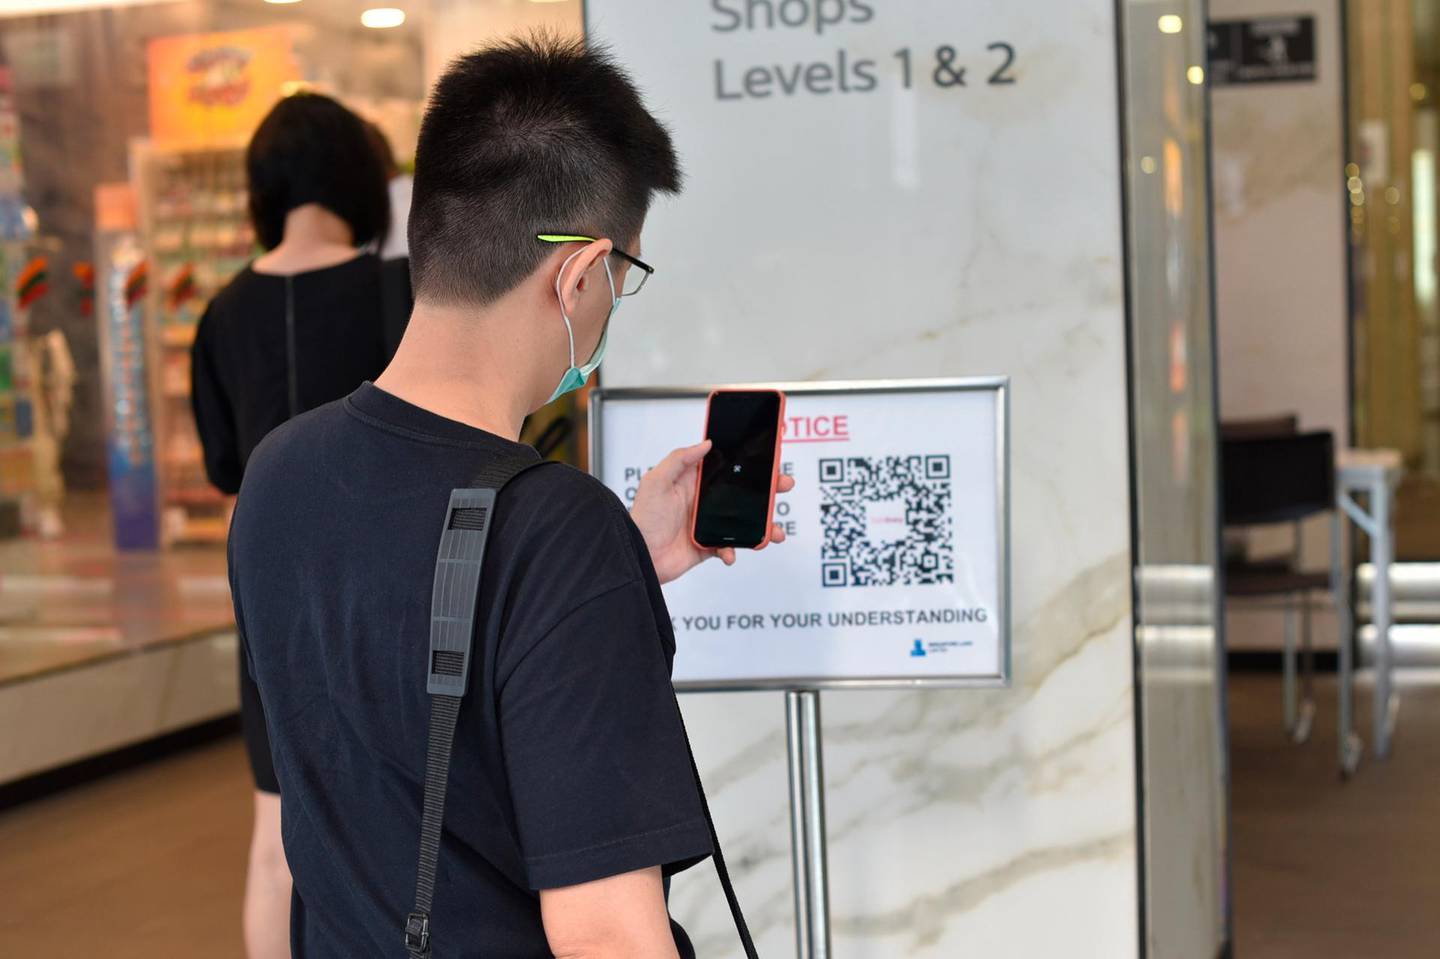 A man scans a QR code before entering a building in Singapore Tuesday, June 2, 2020. Singapore reopened 75 percent of its economy Tuesday, as part of a three-phase controlled approach to end a virus lockdown since early April. (AP Photo/YK Chan)